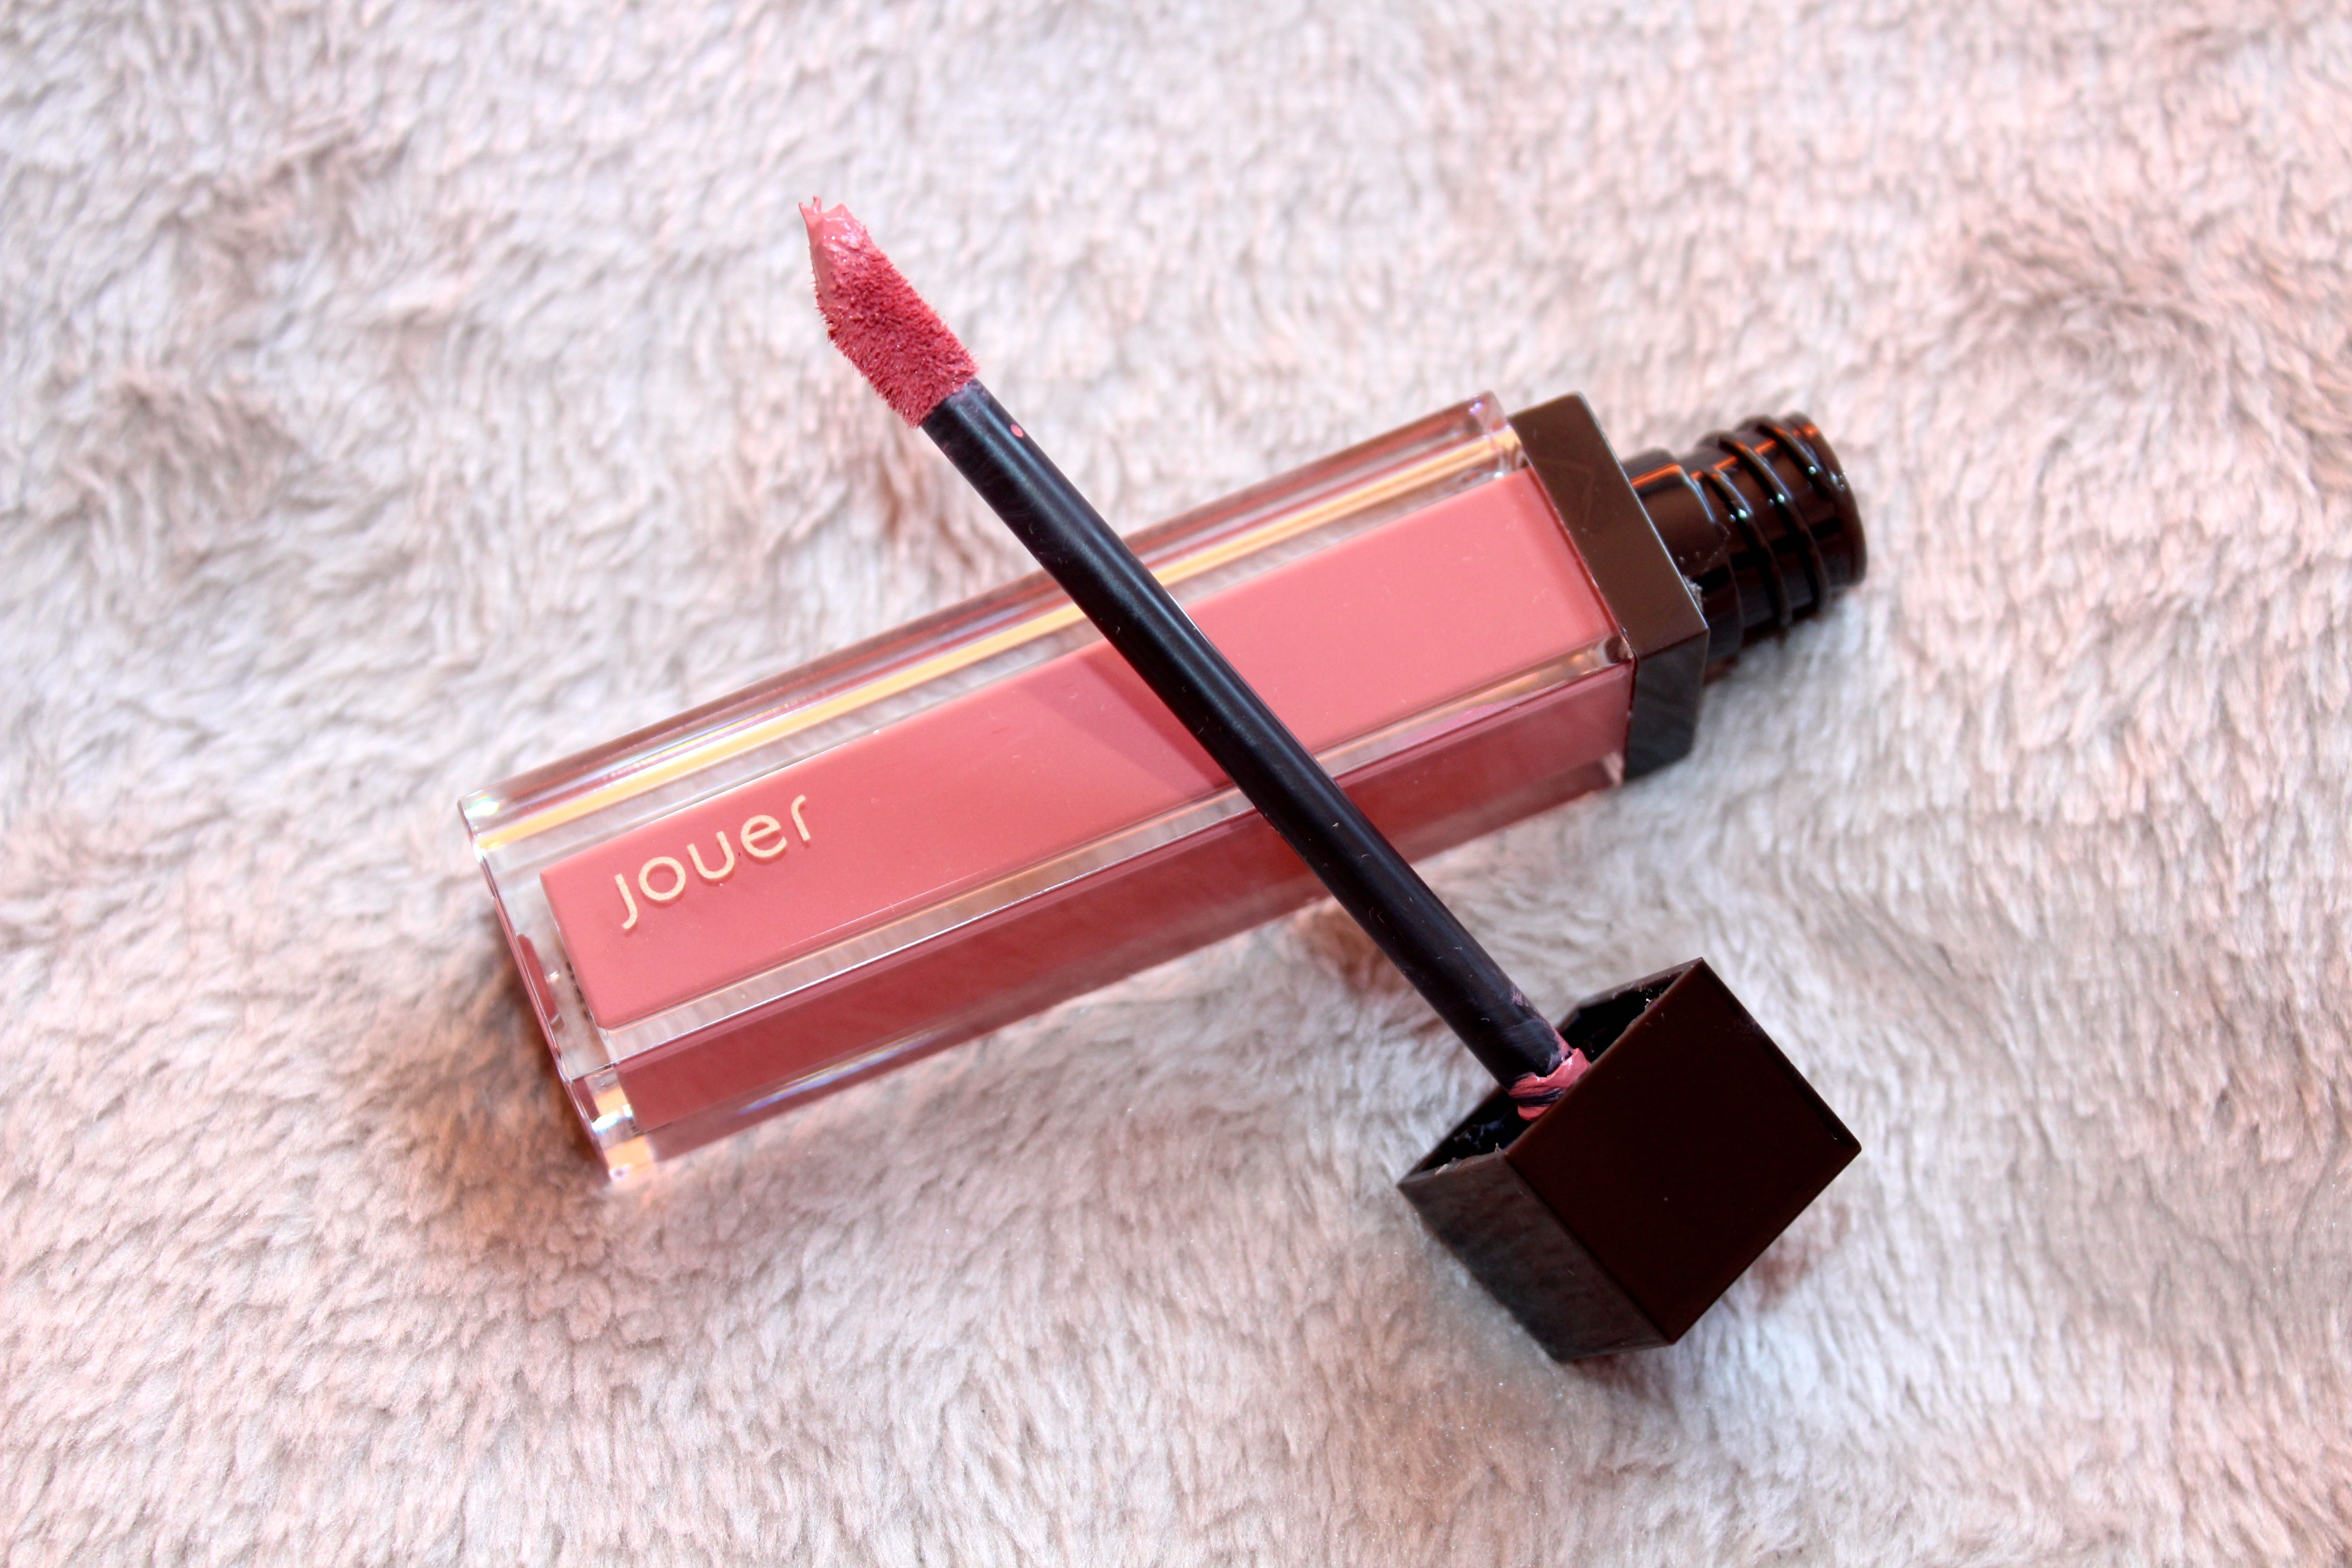 Jouer Long Wear Lip Cream Review by Facemadeup